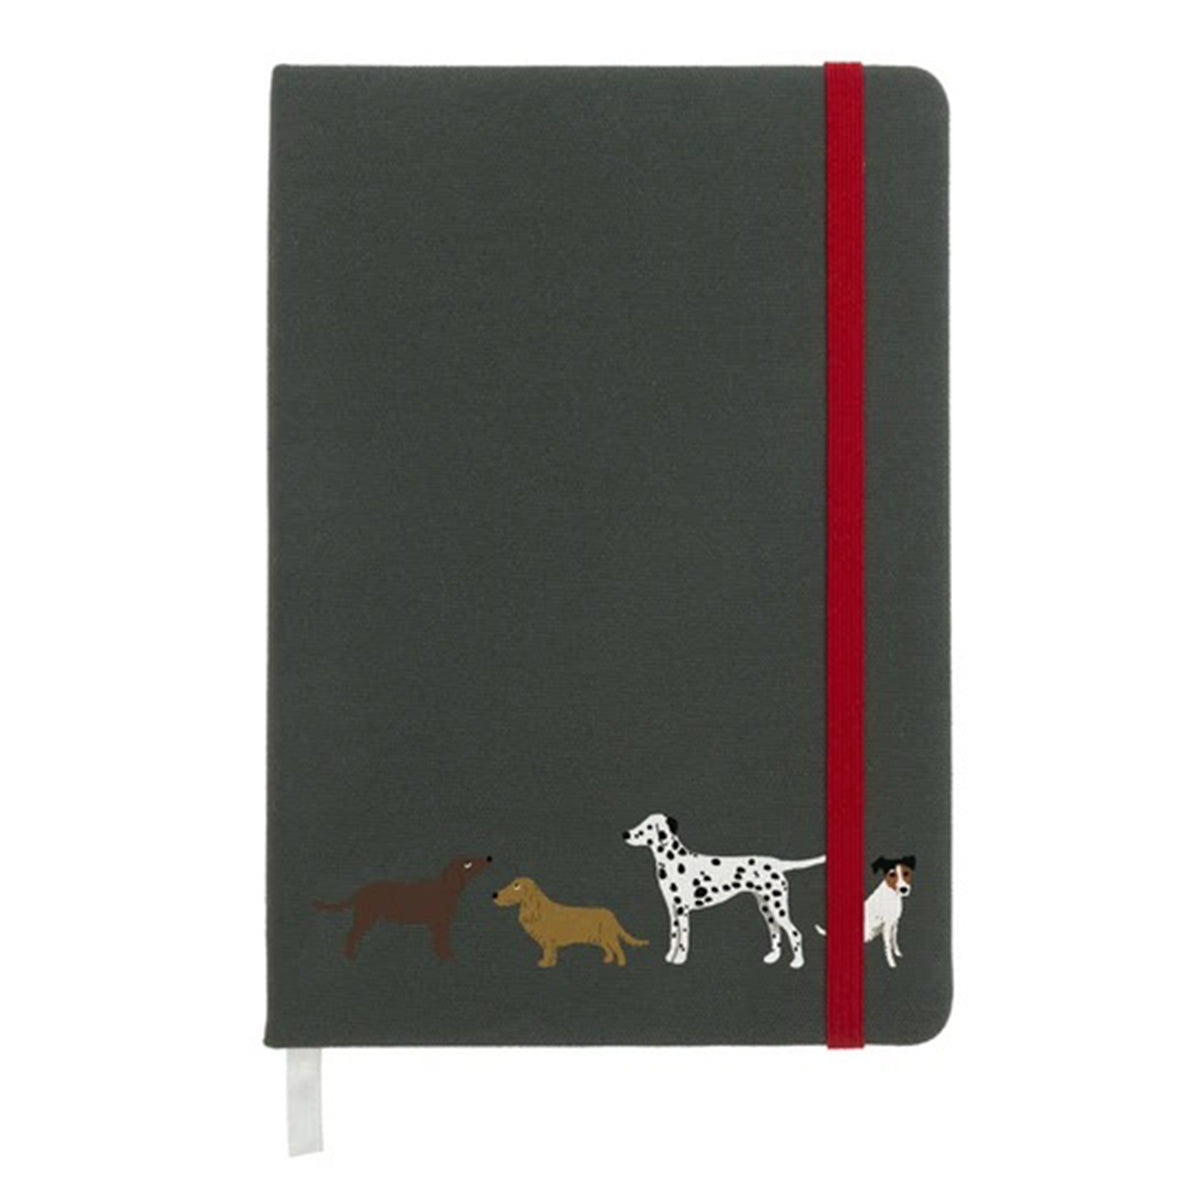 A Sophie Allport B6 sized gray notebook with an elastic red closure featuring illustrations of three different dog breeds on the cover and a ribbon page marker.